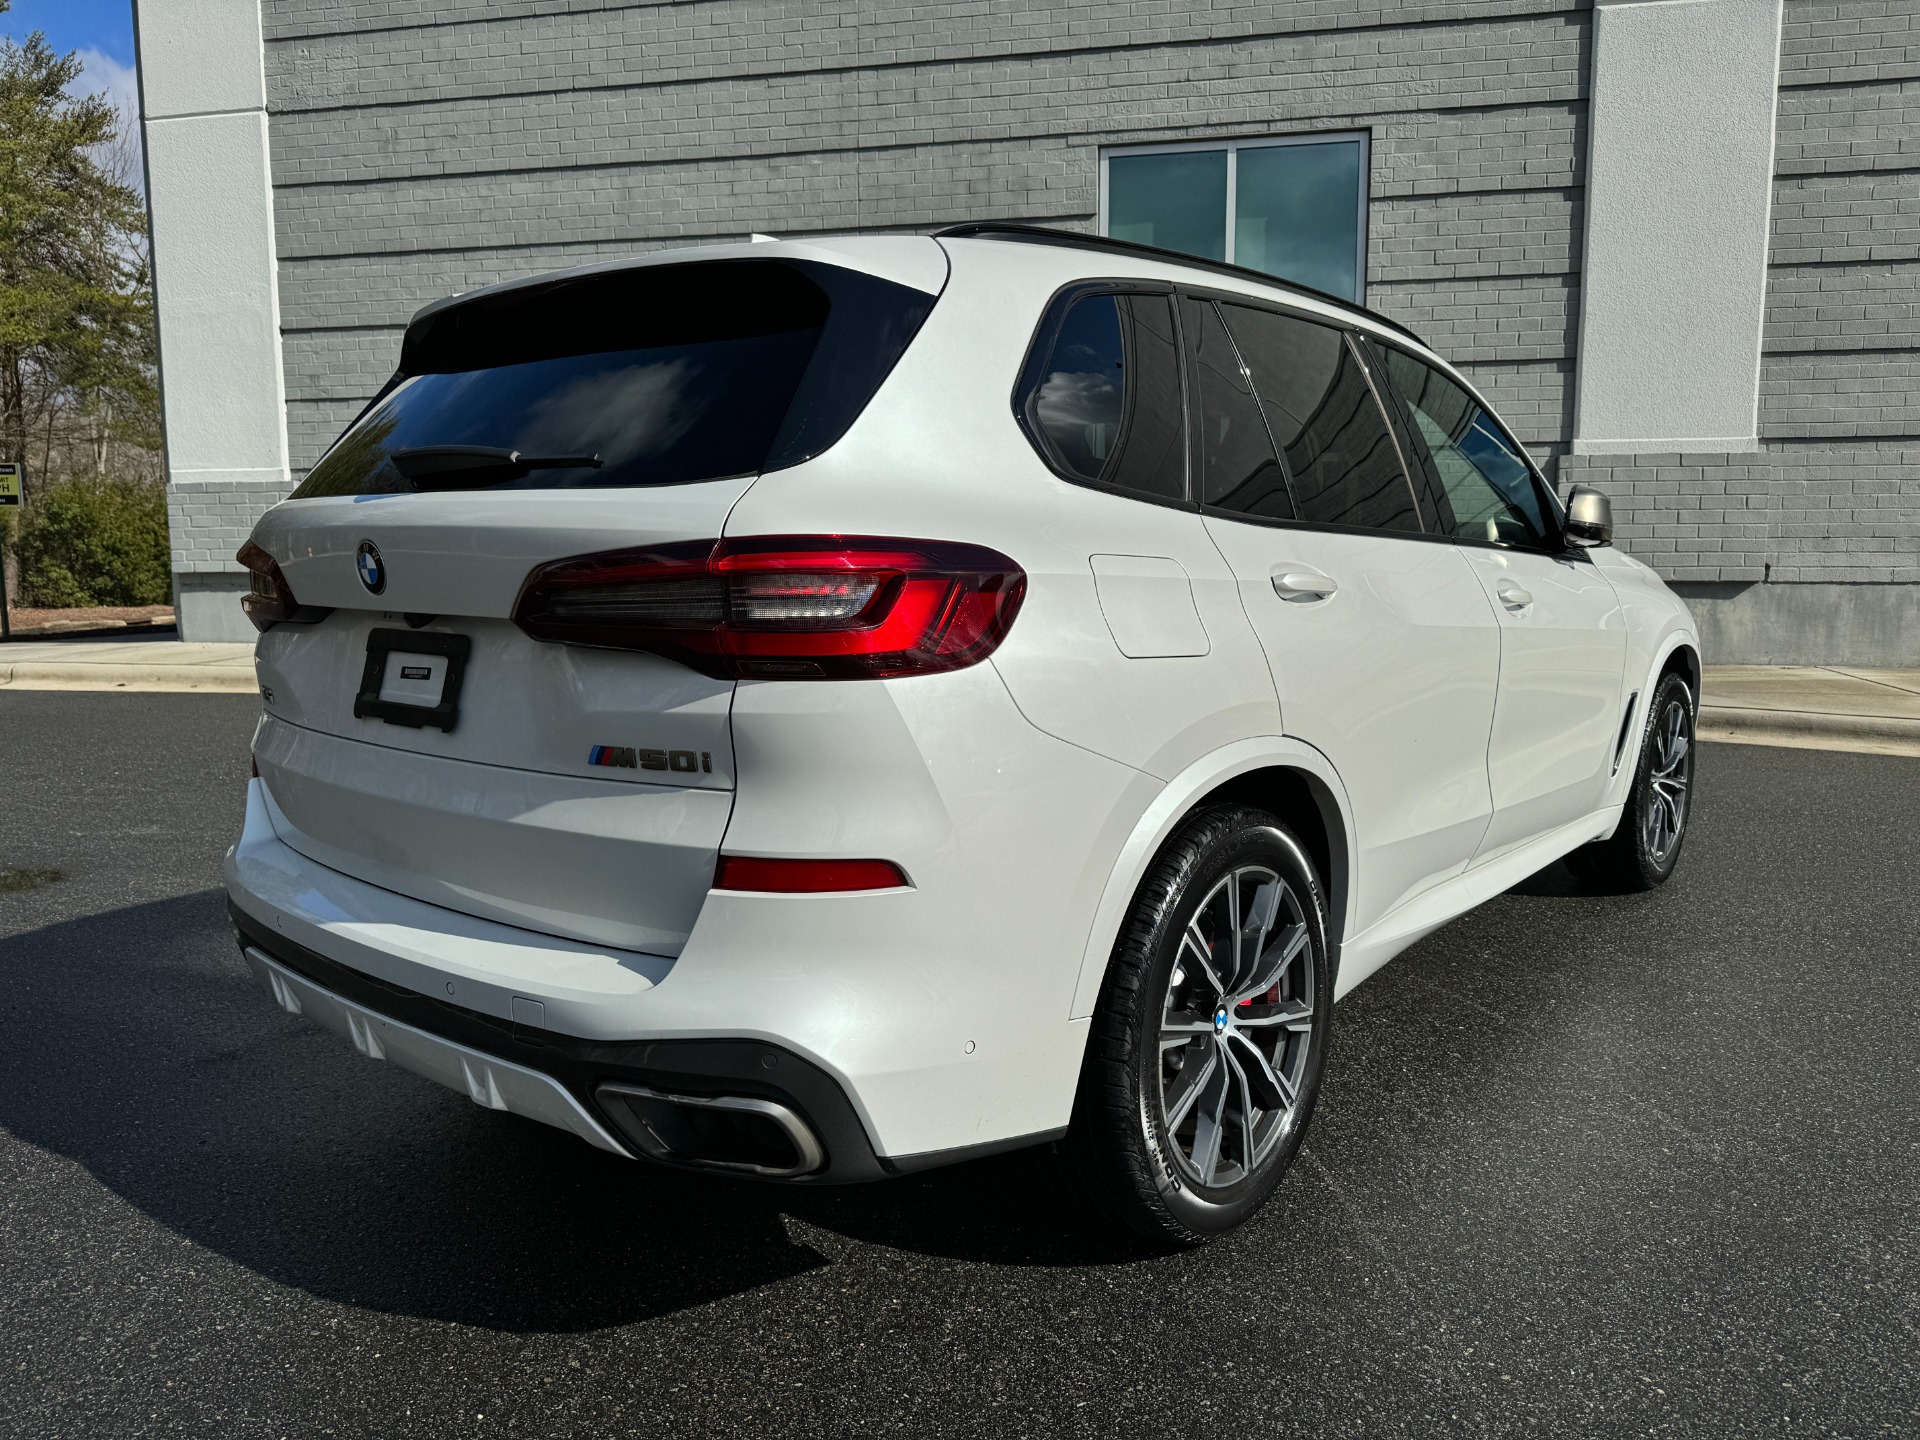 Used 2021 BMW X5 M50i AIR SUSPENSION / COGNAC LEATHER for sale $55,000 at Formula Imports in Charlotte NC 28227 7